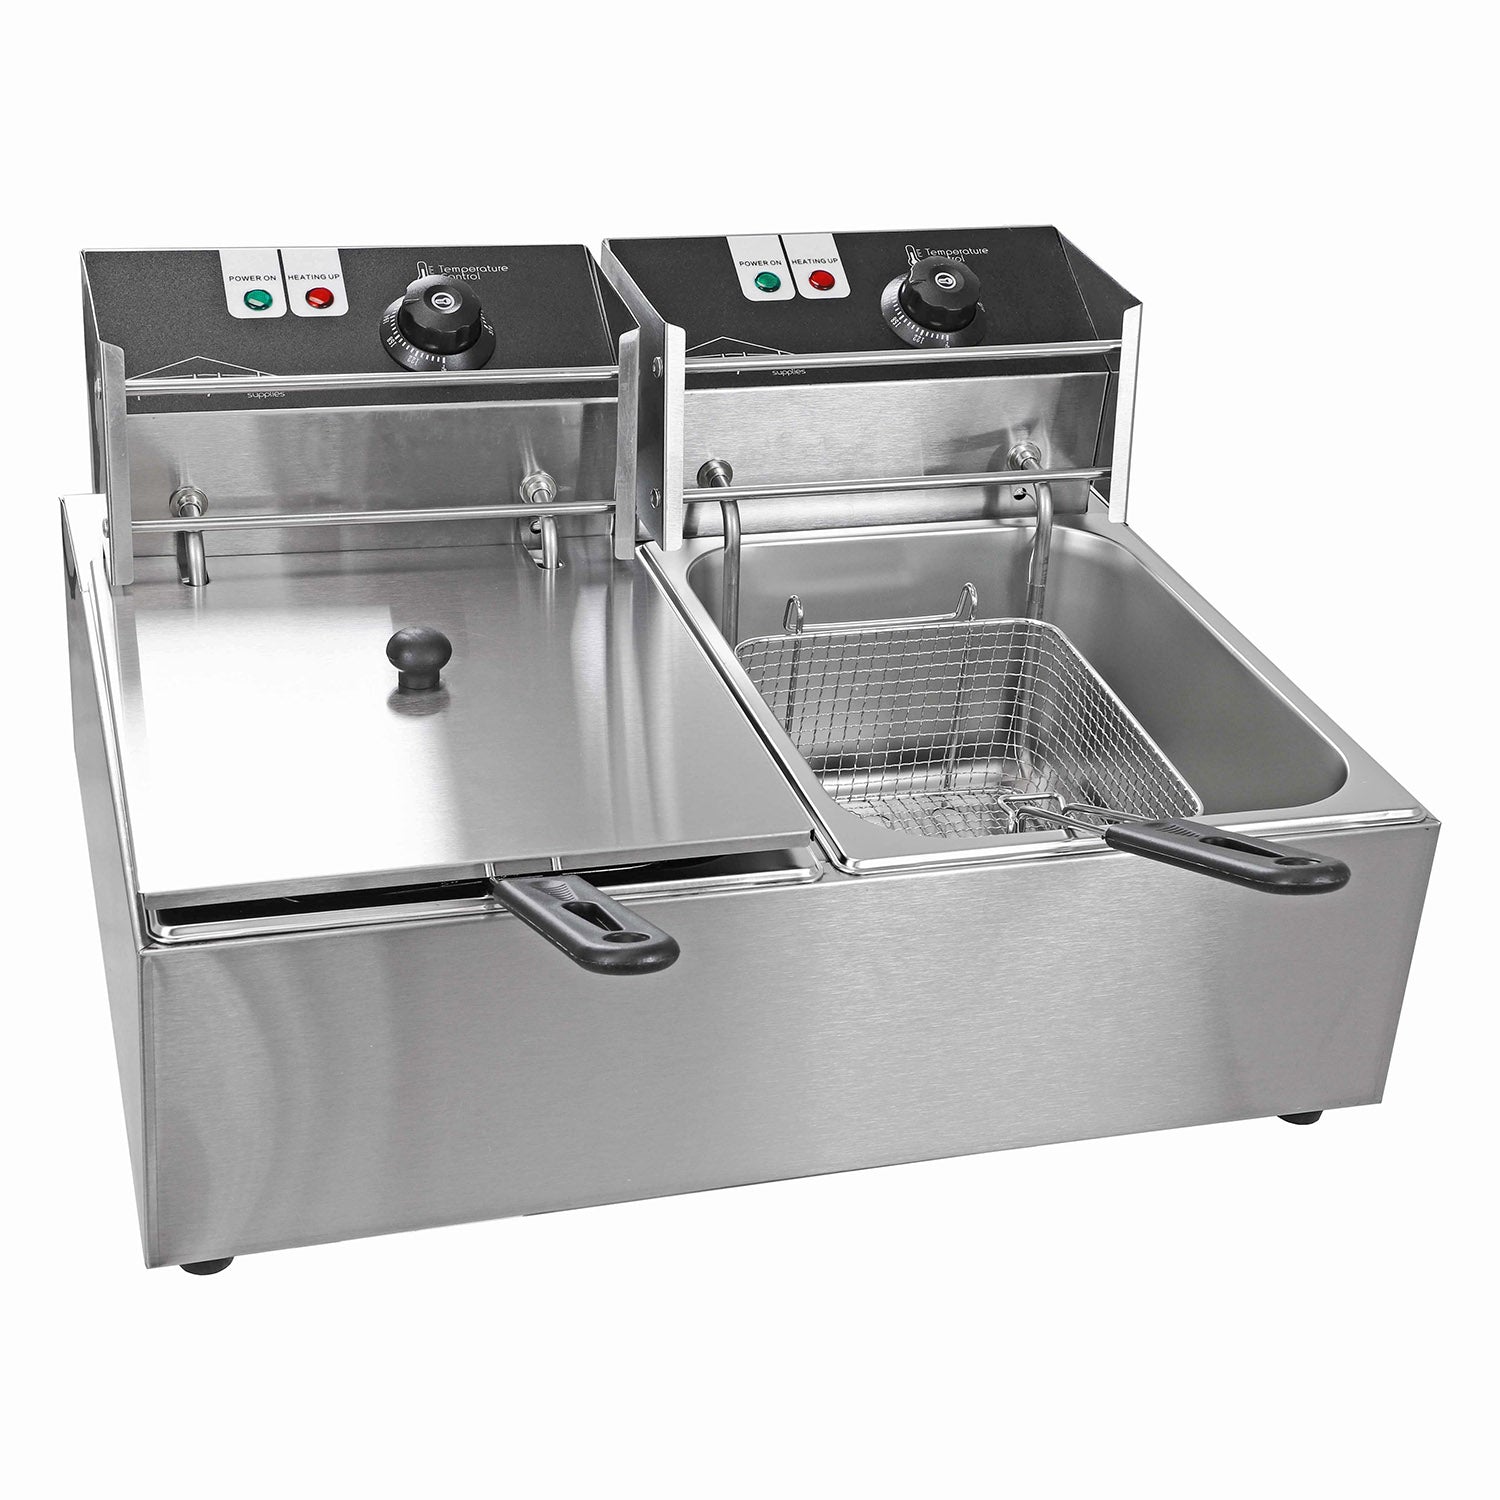 PartyHut Commercial Deep Fryer 110v Two 12 Liter Basins Capacity